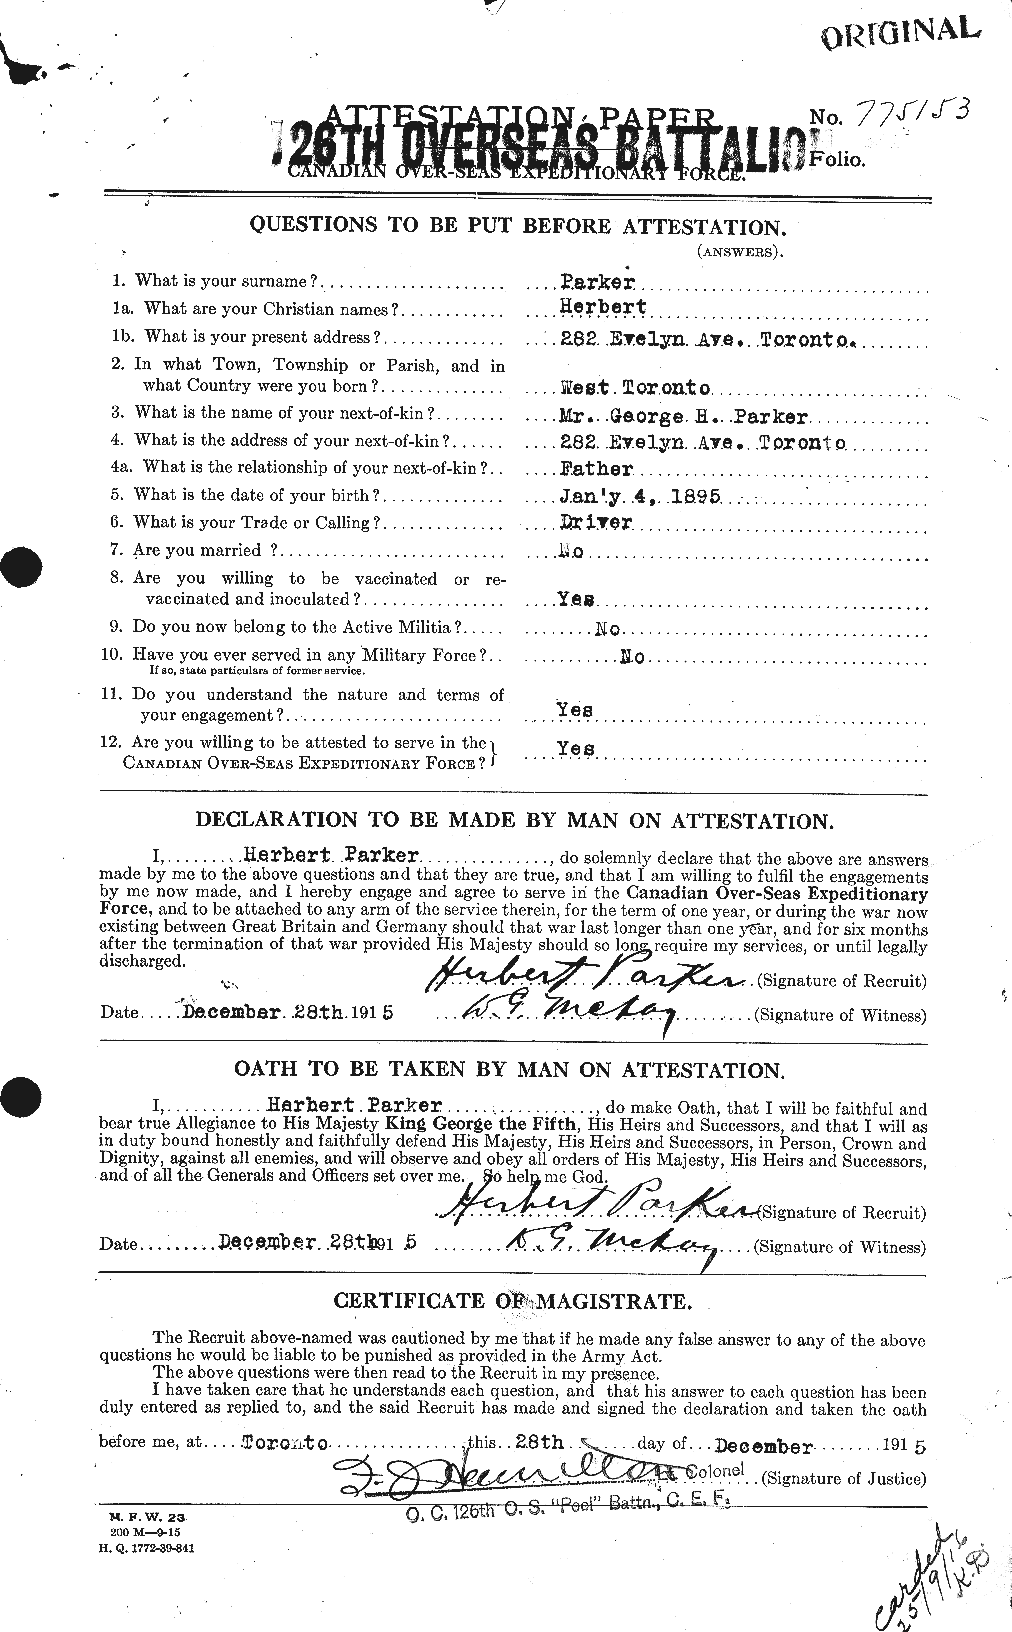 Personnel Records of the First World War - CEF 565363a